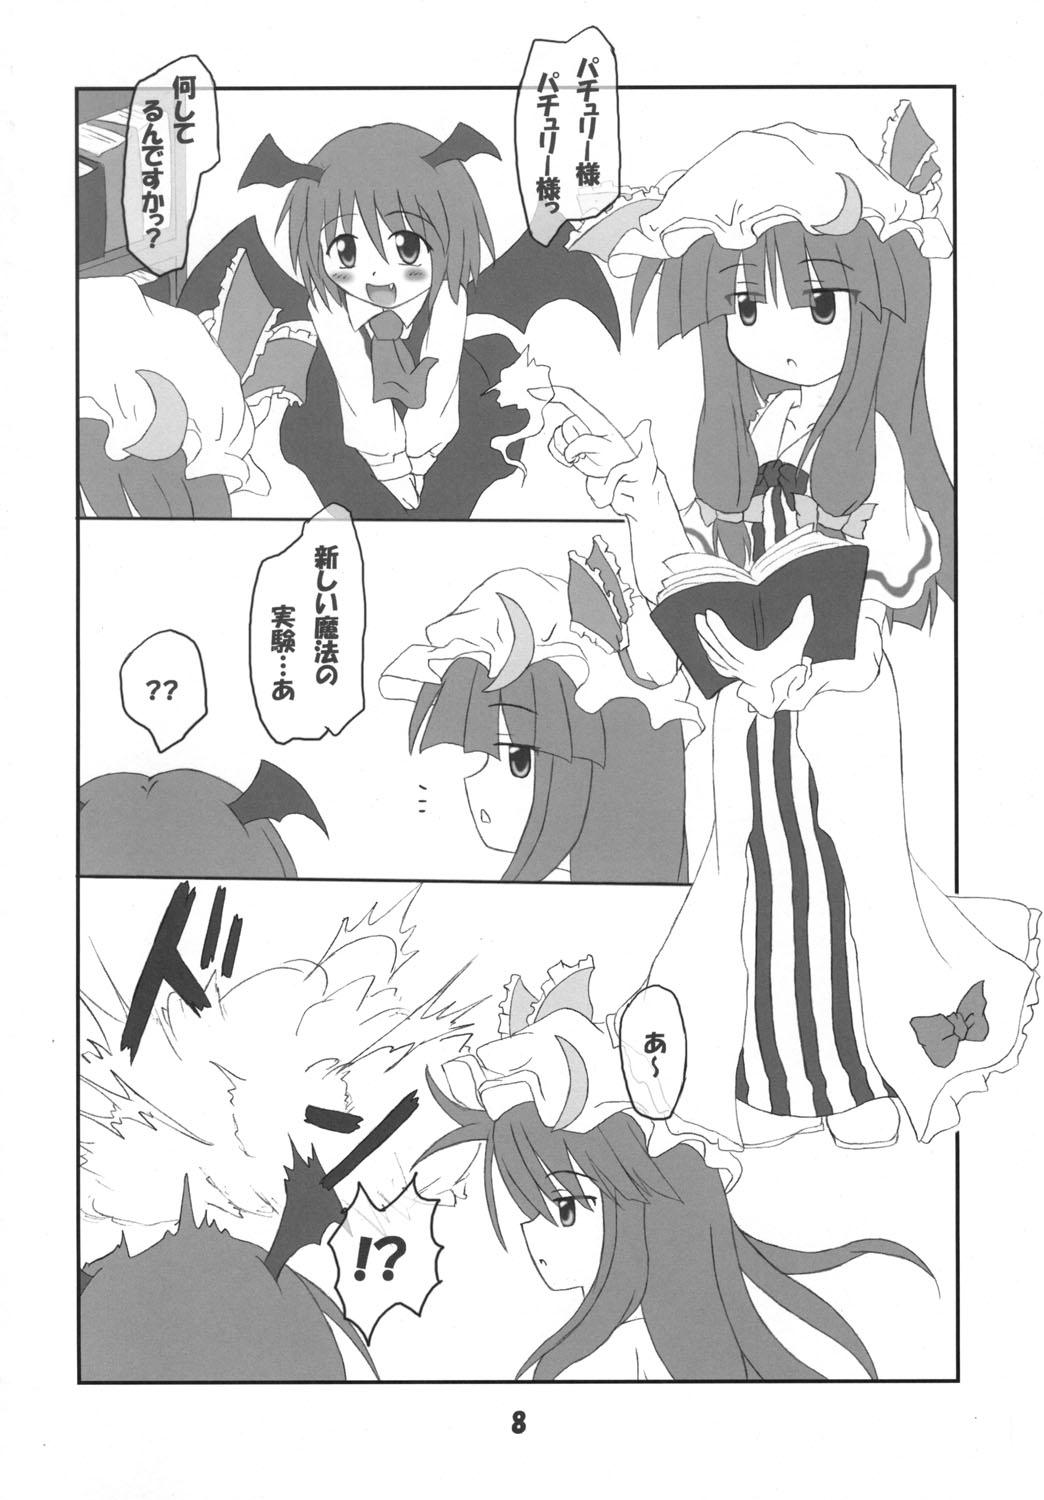 Flashing Rollin 18 - Touhou project Amateurs Gone - Page 7